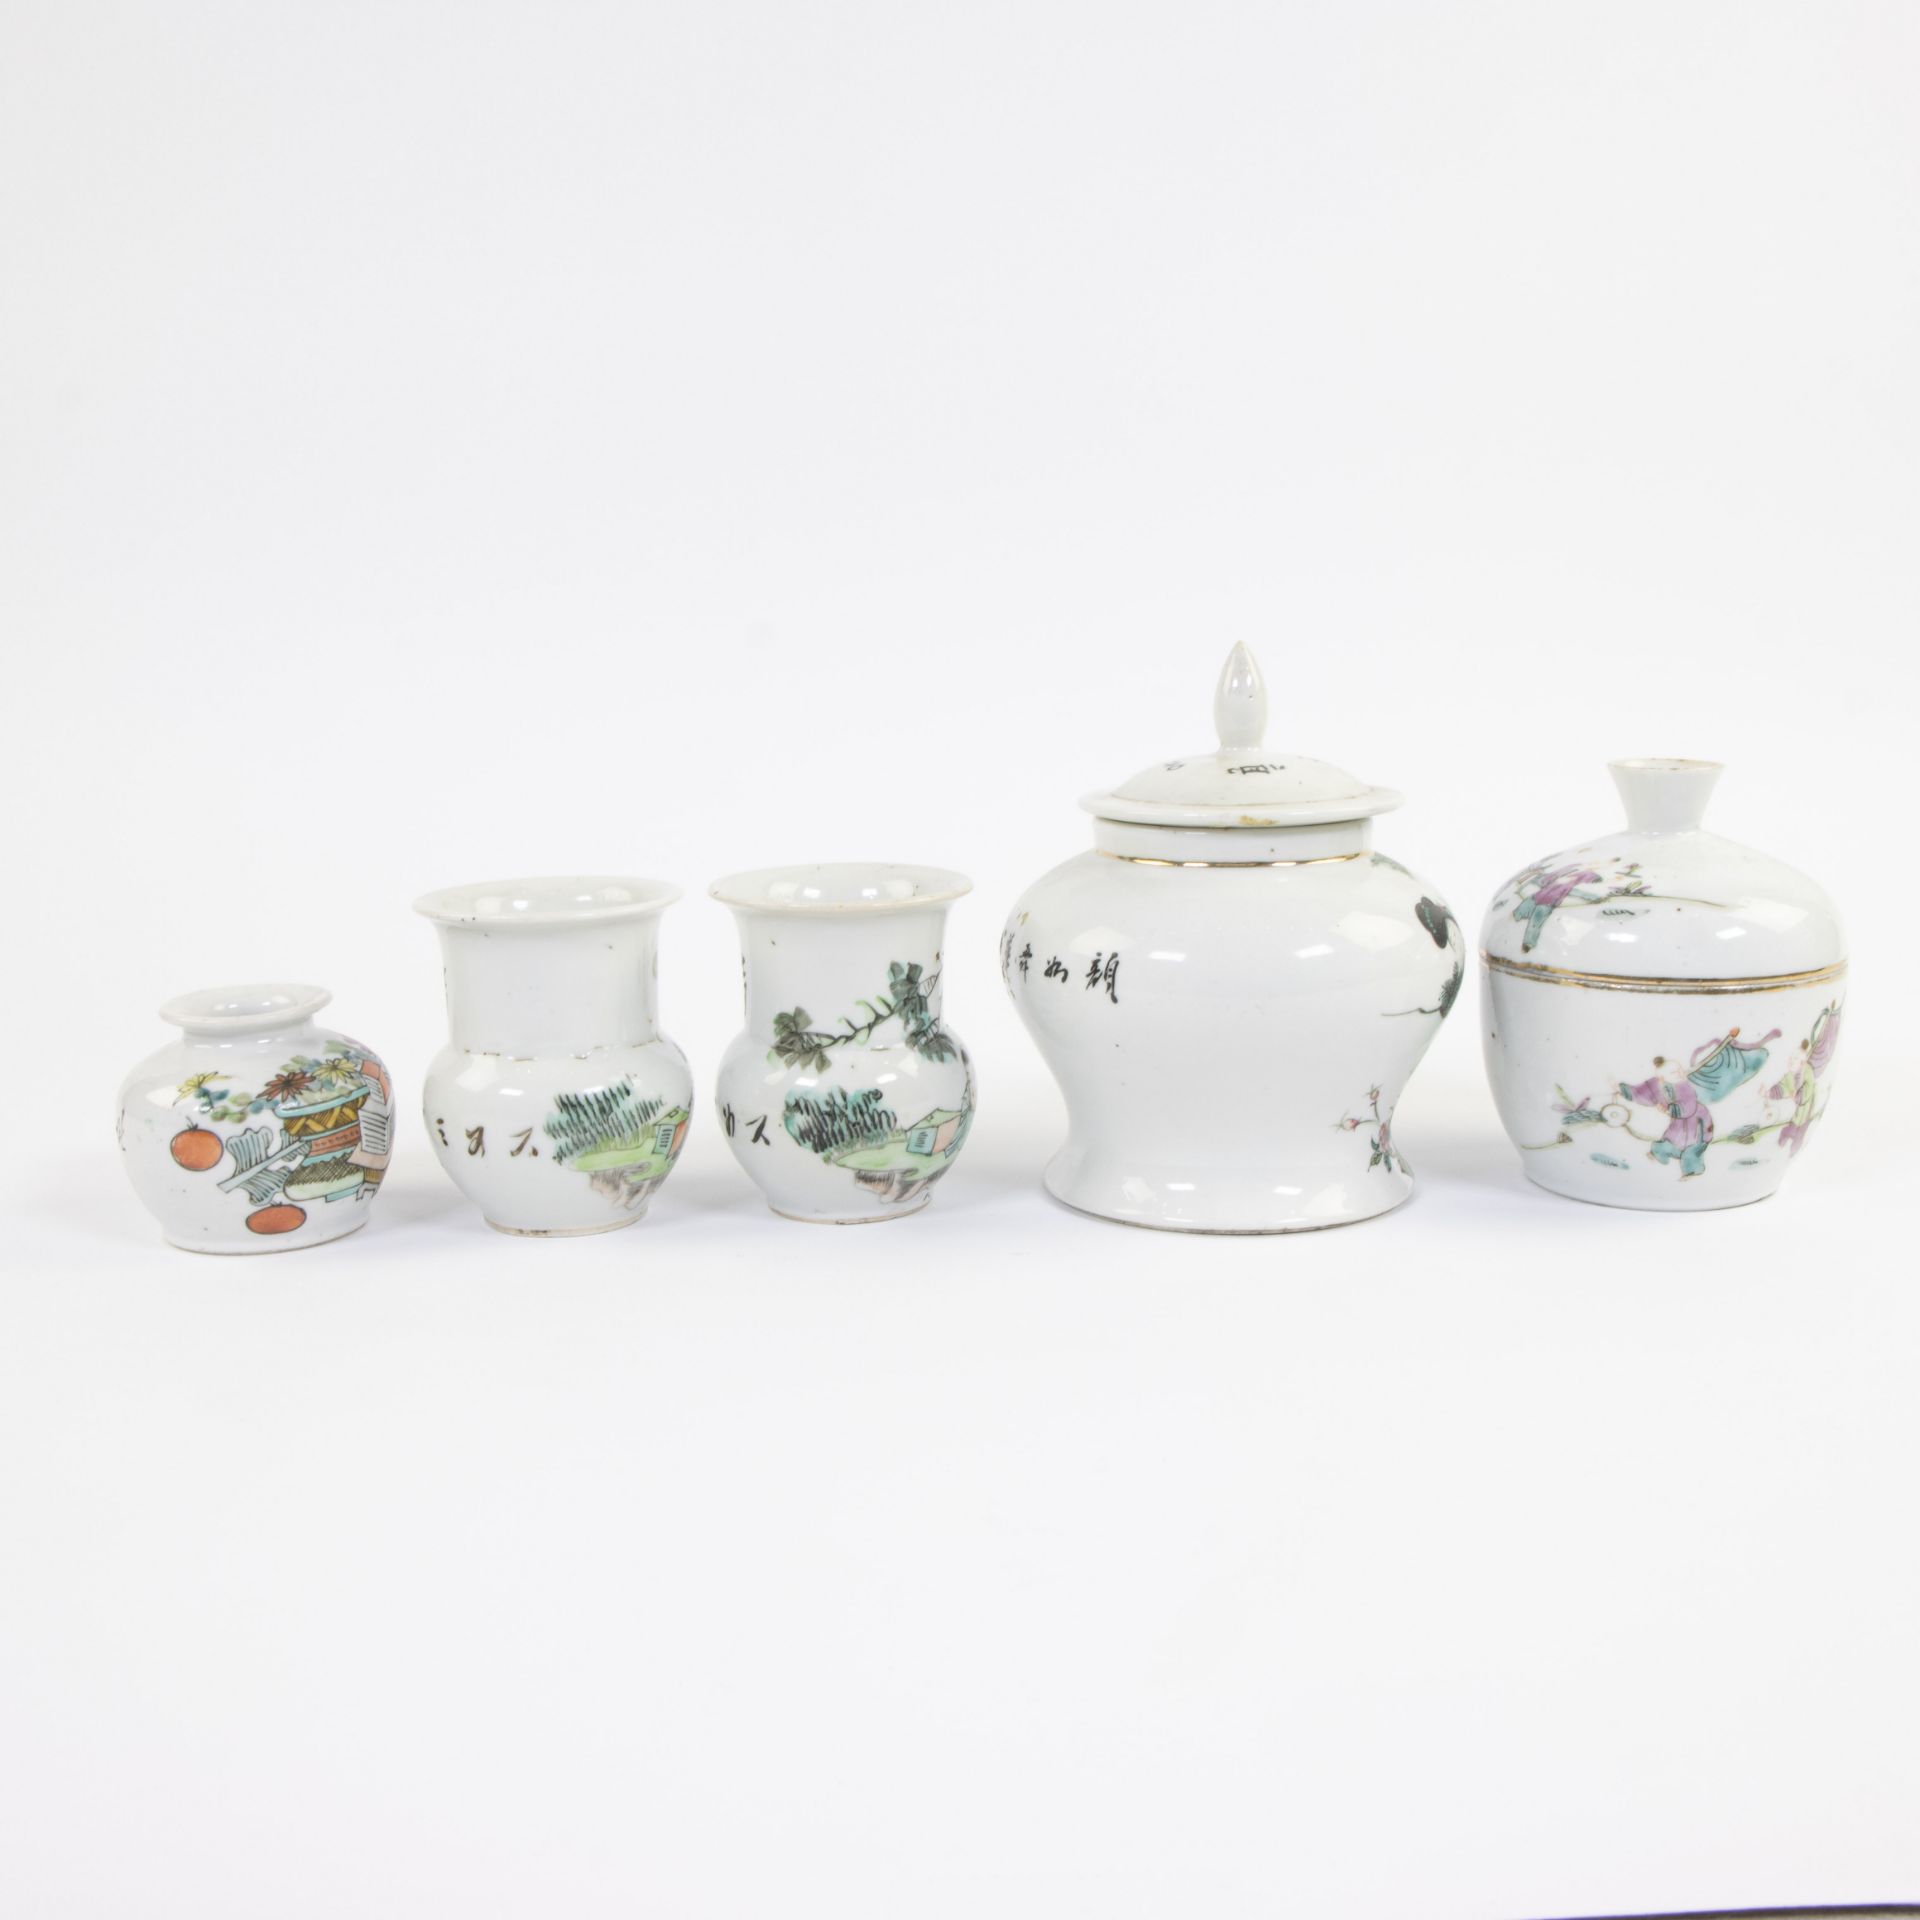 Collection of Chinese porcelain, 3 vases and 2 lidded vases - Image 4 of 7